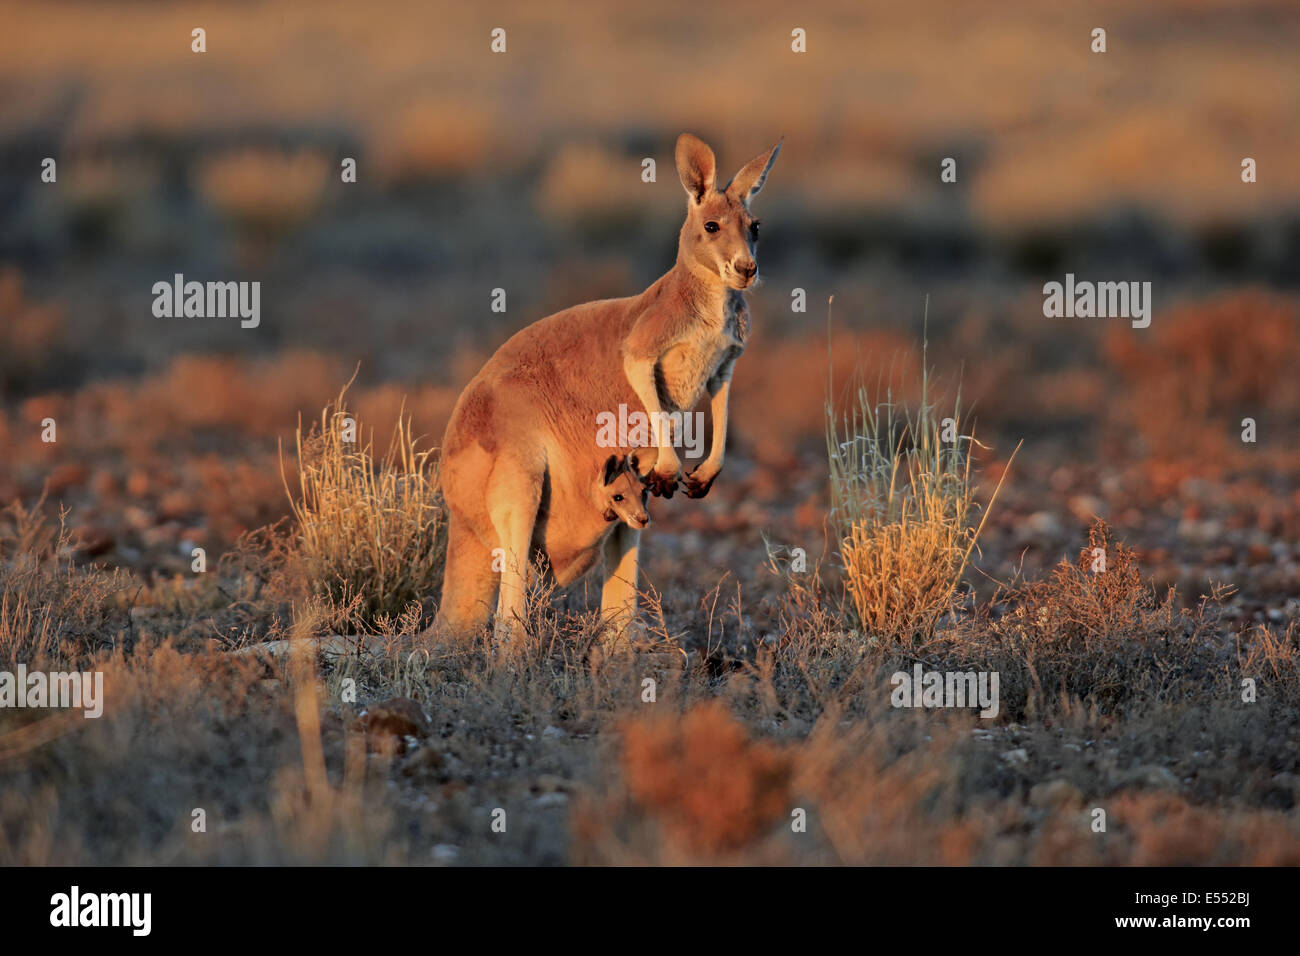 Red Kangaroo (Macropus rufus) adult female with young, looking out from pouch, standing in dry outback at sunset, Sturt N.P., New South Wales, Australia, October Stock Photo